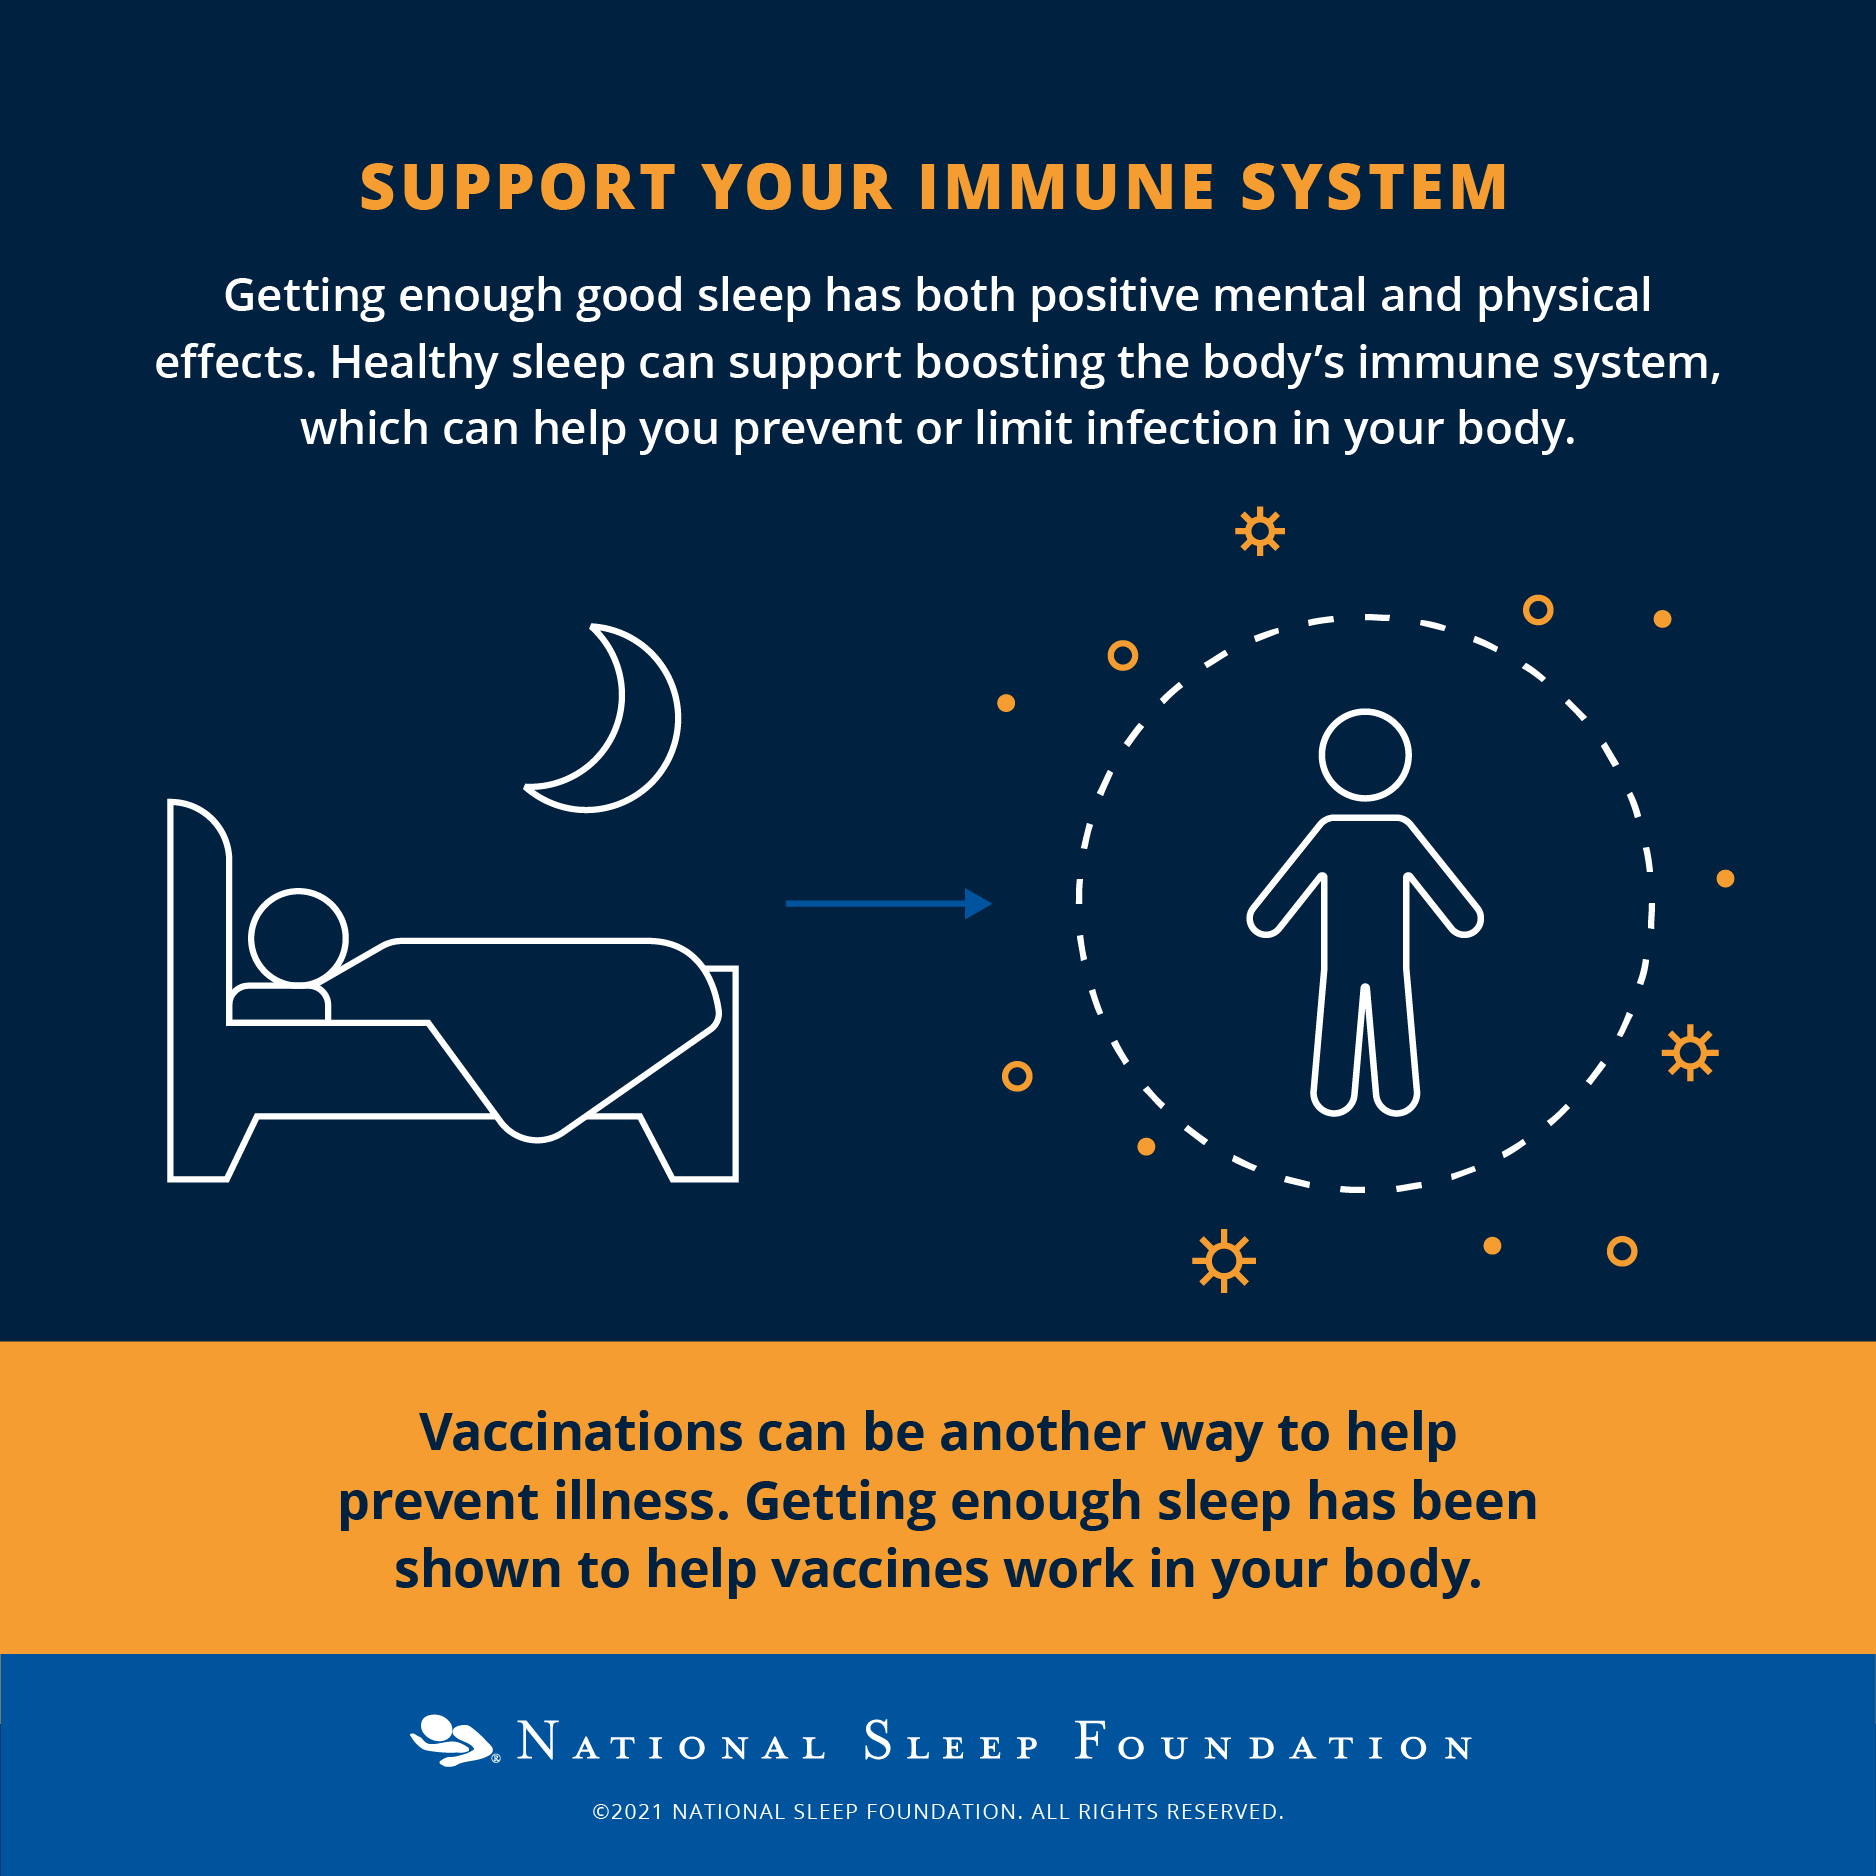 Proper sleep can support your immune system